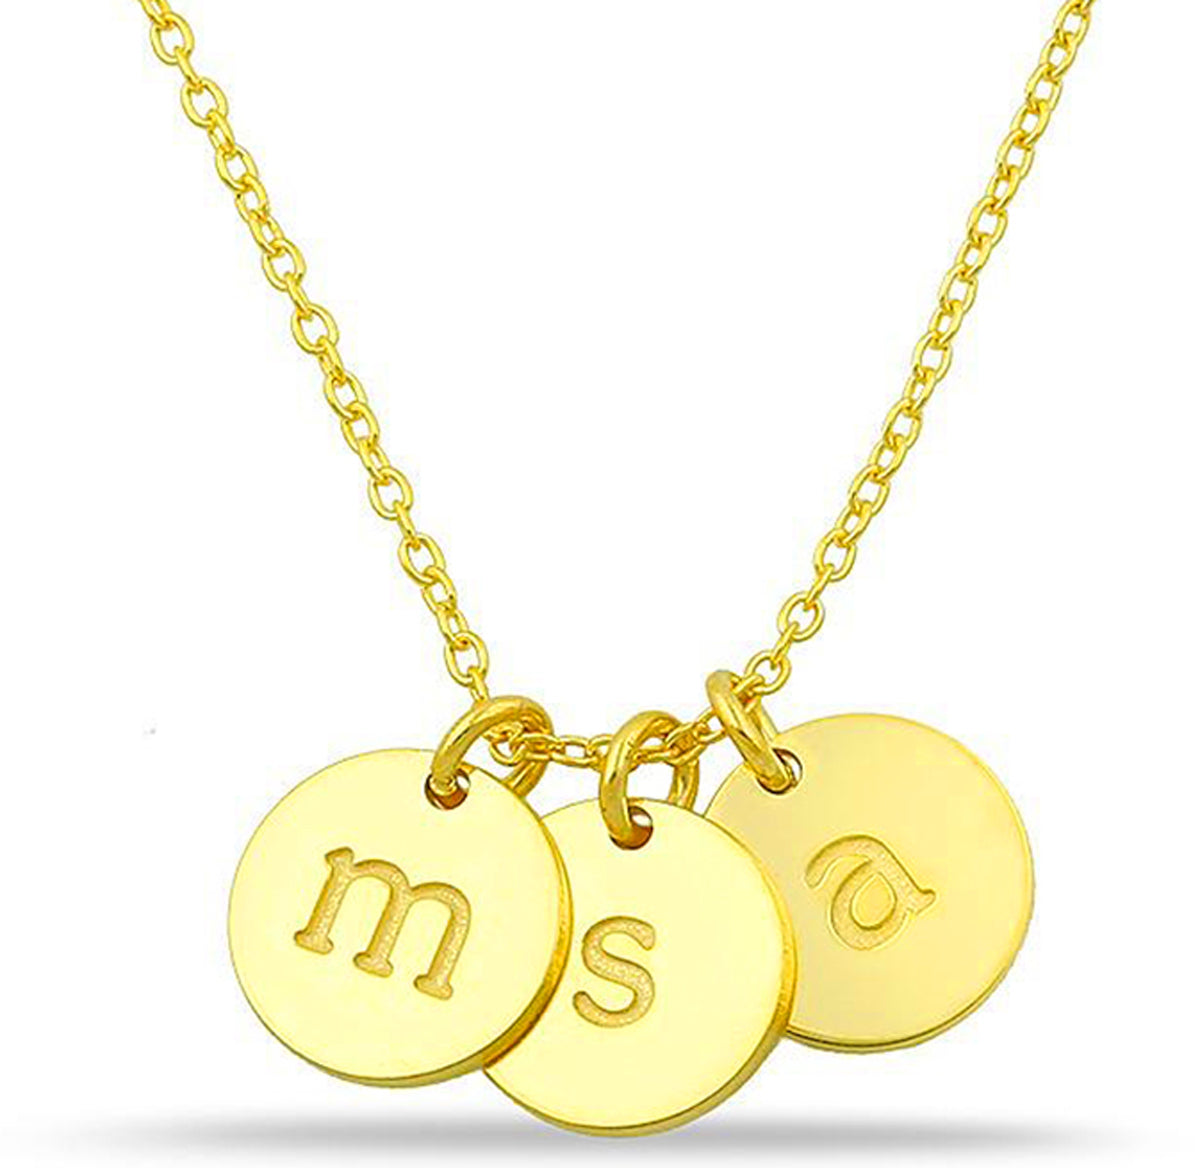 Disc charm necklace engraved with initials